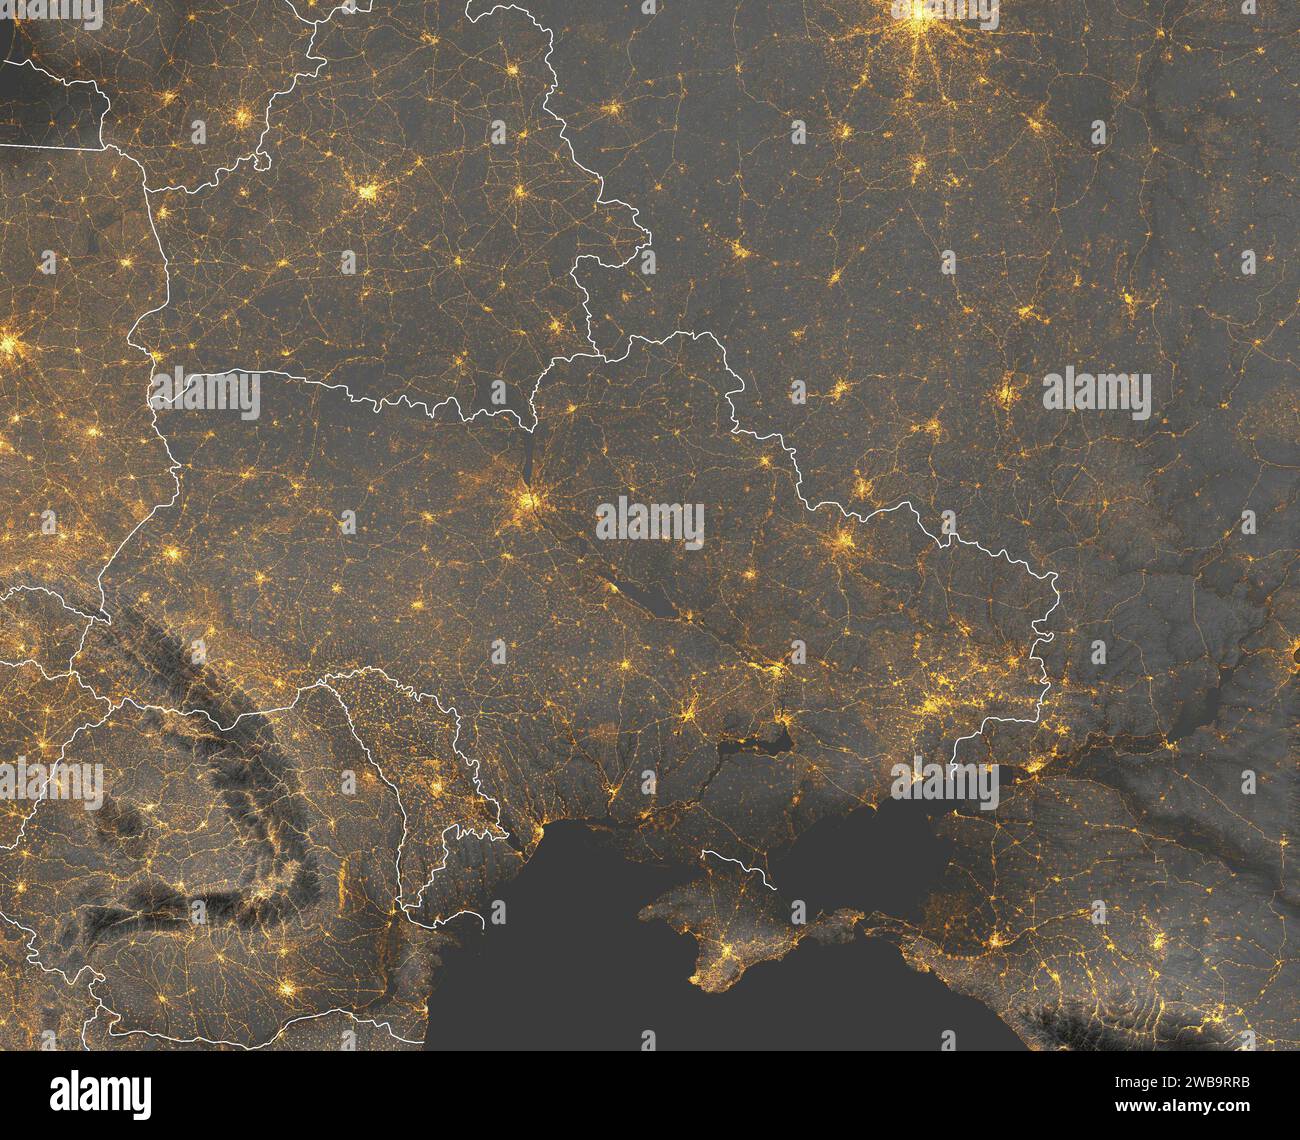 Night satellite view of Ukraine, black Sea and borders. City and street lights. Elements of this image are furnished by Nasa Stock Photo